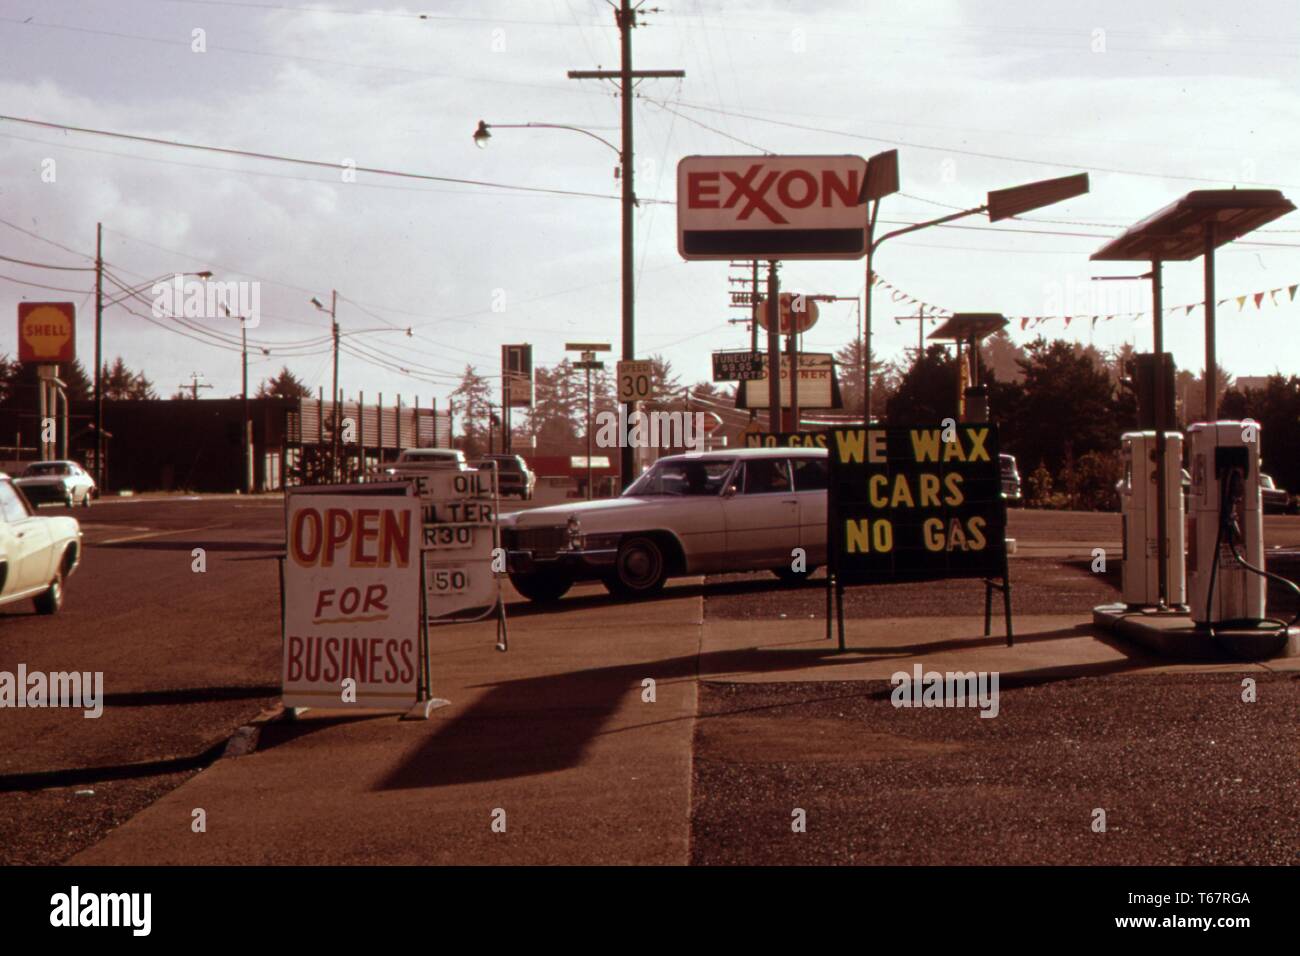 'No gas' signs were a common sight in Oregon during the fall of 1973. This station on the coast was open for any business other than selling gasoline. Many stations closed earlier, opened later and shut down on the weekends. Image courtesy National Archives, United States, 1973. Stock Photo